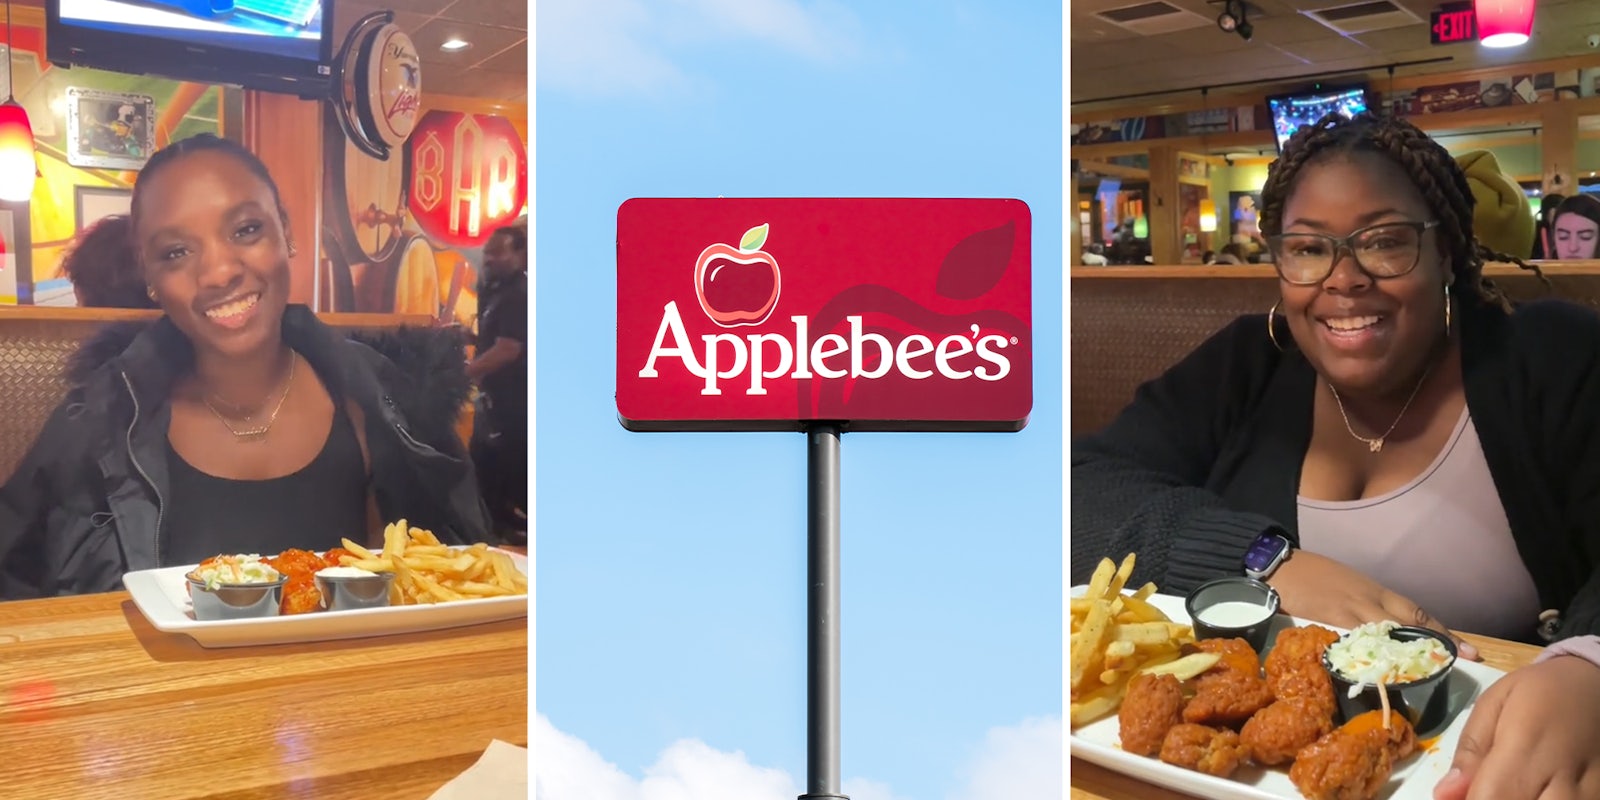 Applebee's customers try the all-you-can-eat deal for $15